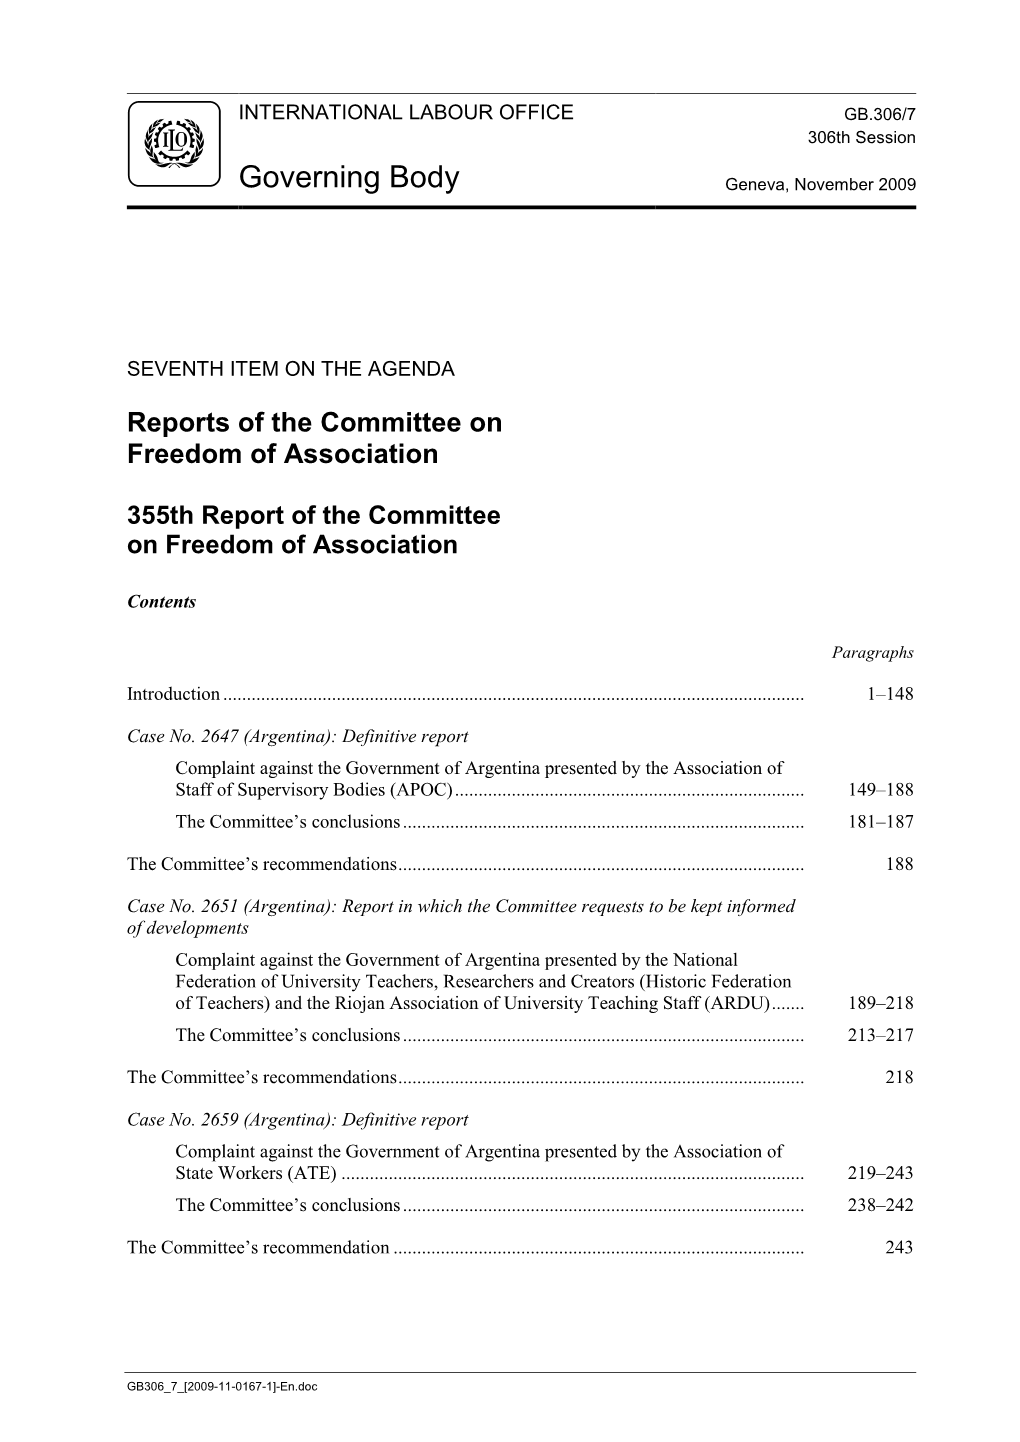 Reports of the Committee on Freedom of Association